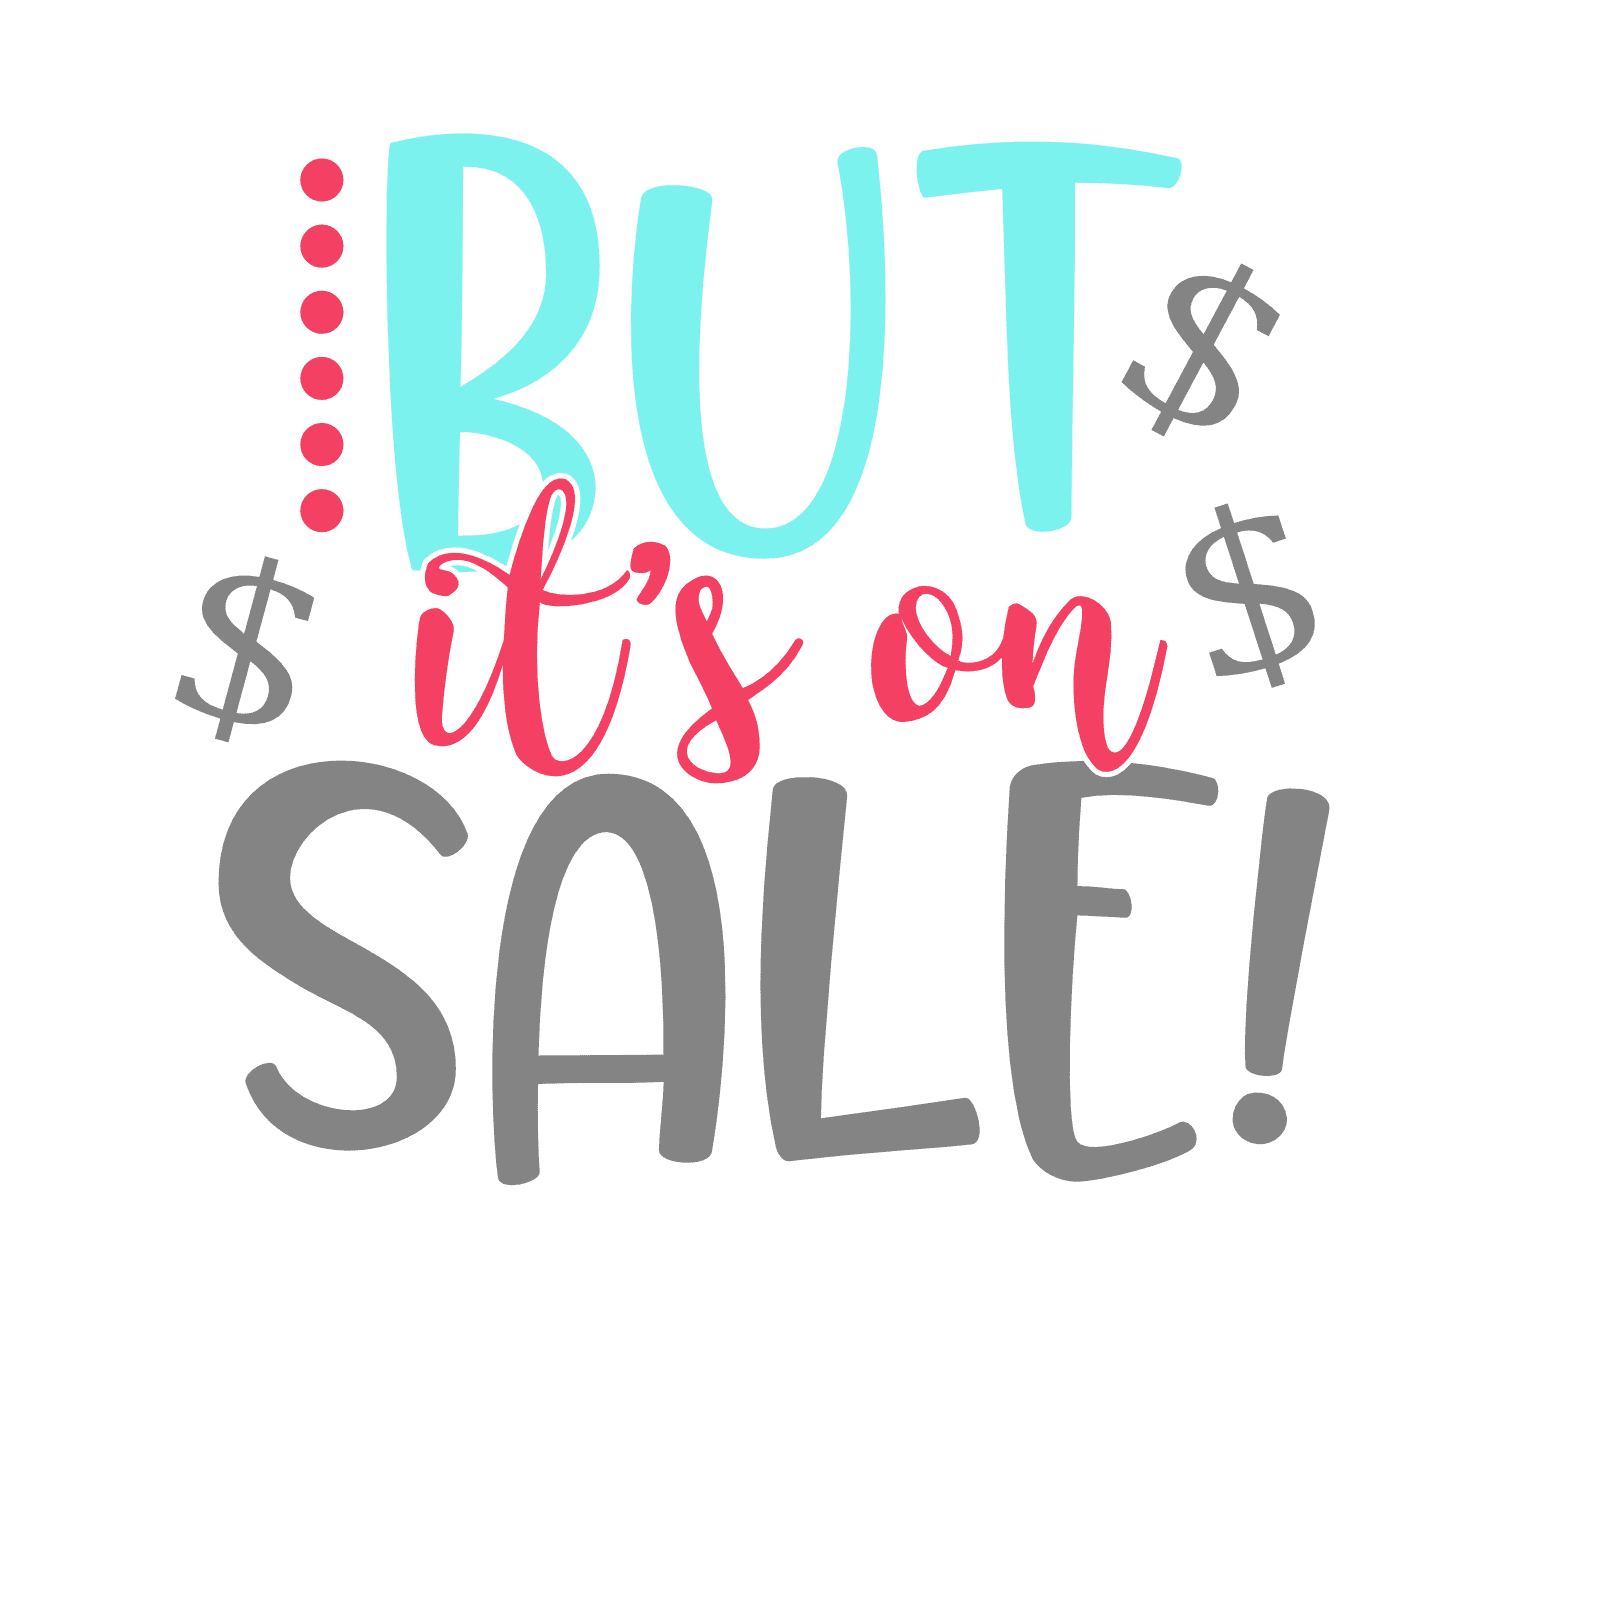 but-its-on-sale-black-friday-free-svg-file-SvgHeart.Com